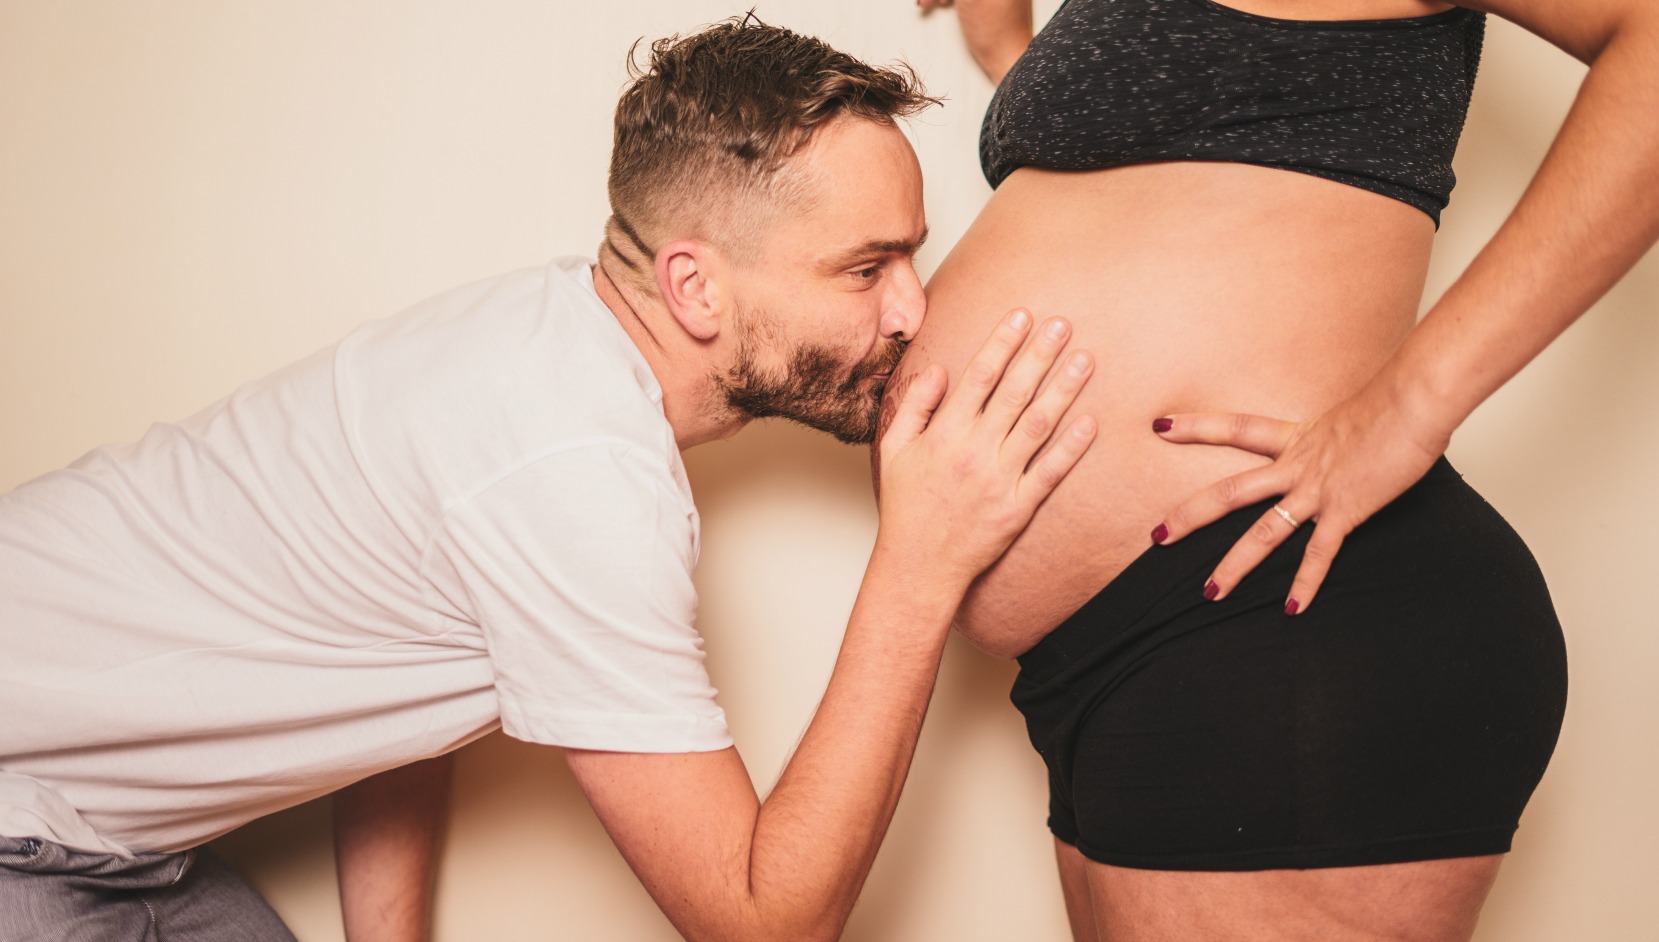 One gay dad’s surrogacy journey